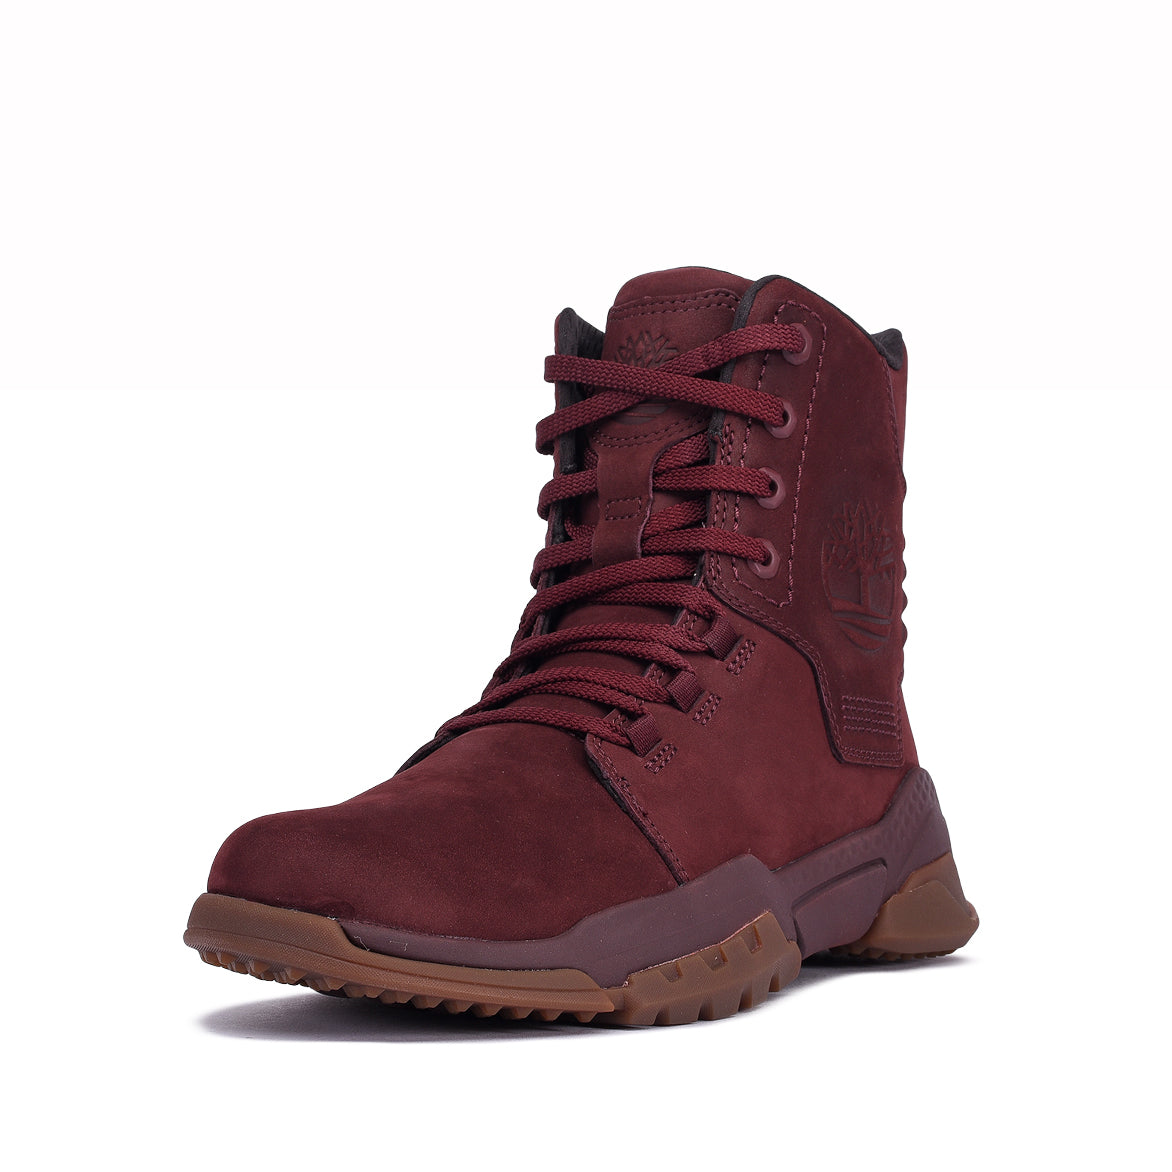 timberland cityforce reveal review